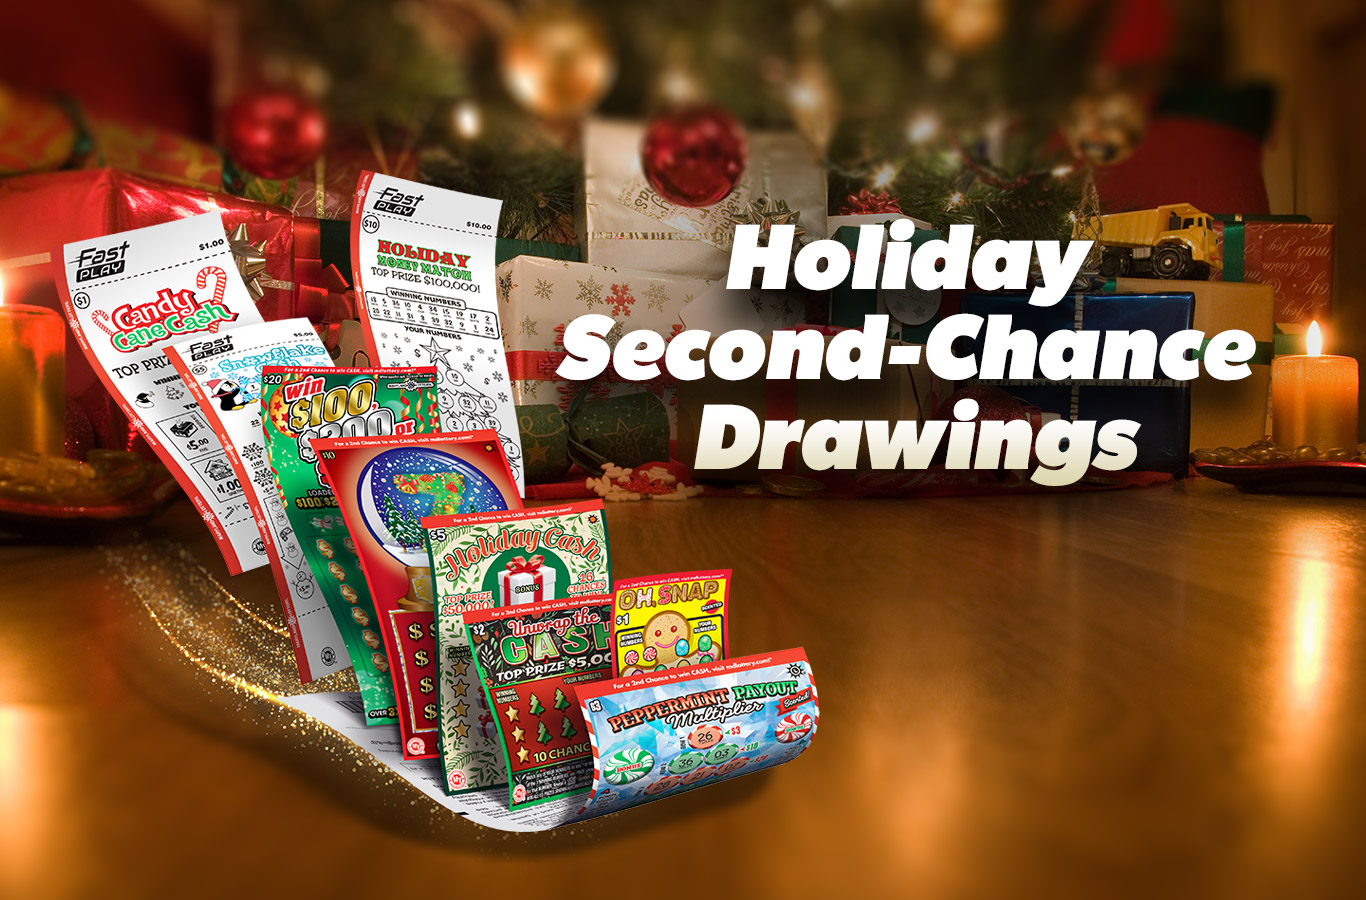 Holiday Scratch-Offs have arrived! You could win up to $100,000 instantly or up to $25,000 in second-chance drawings. Enter early for more chances to win!